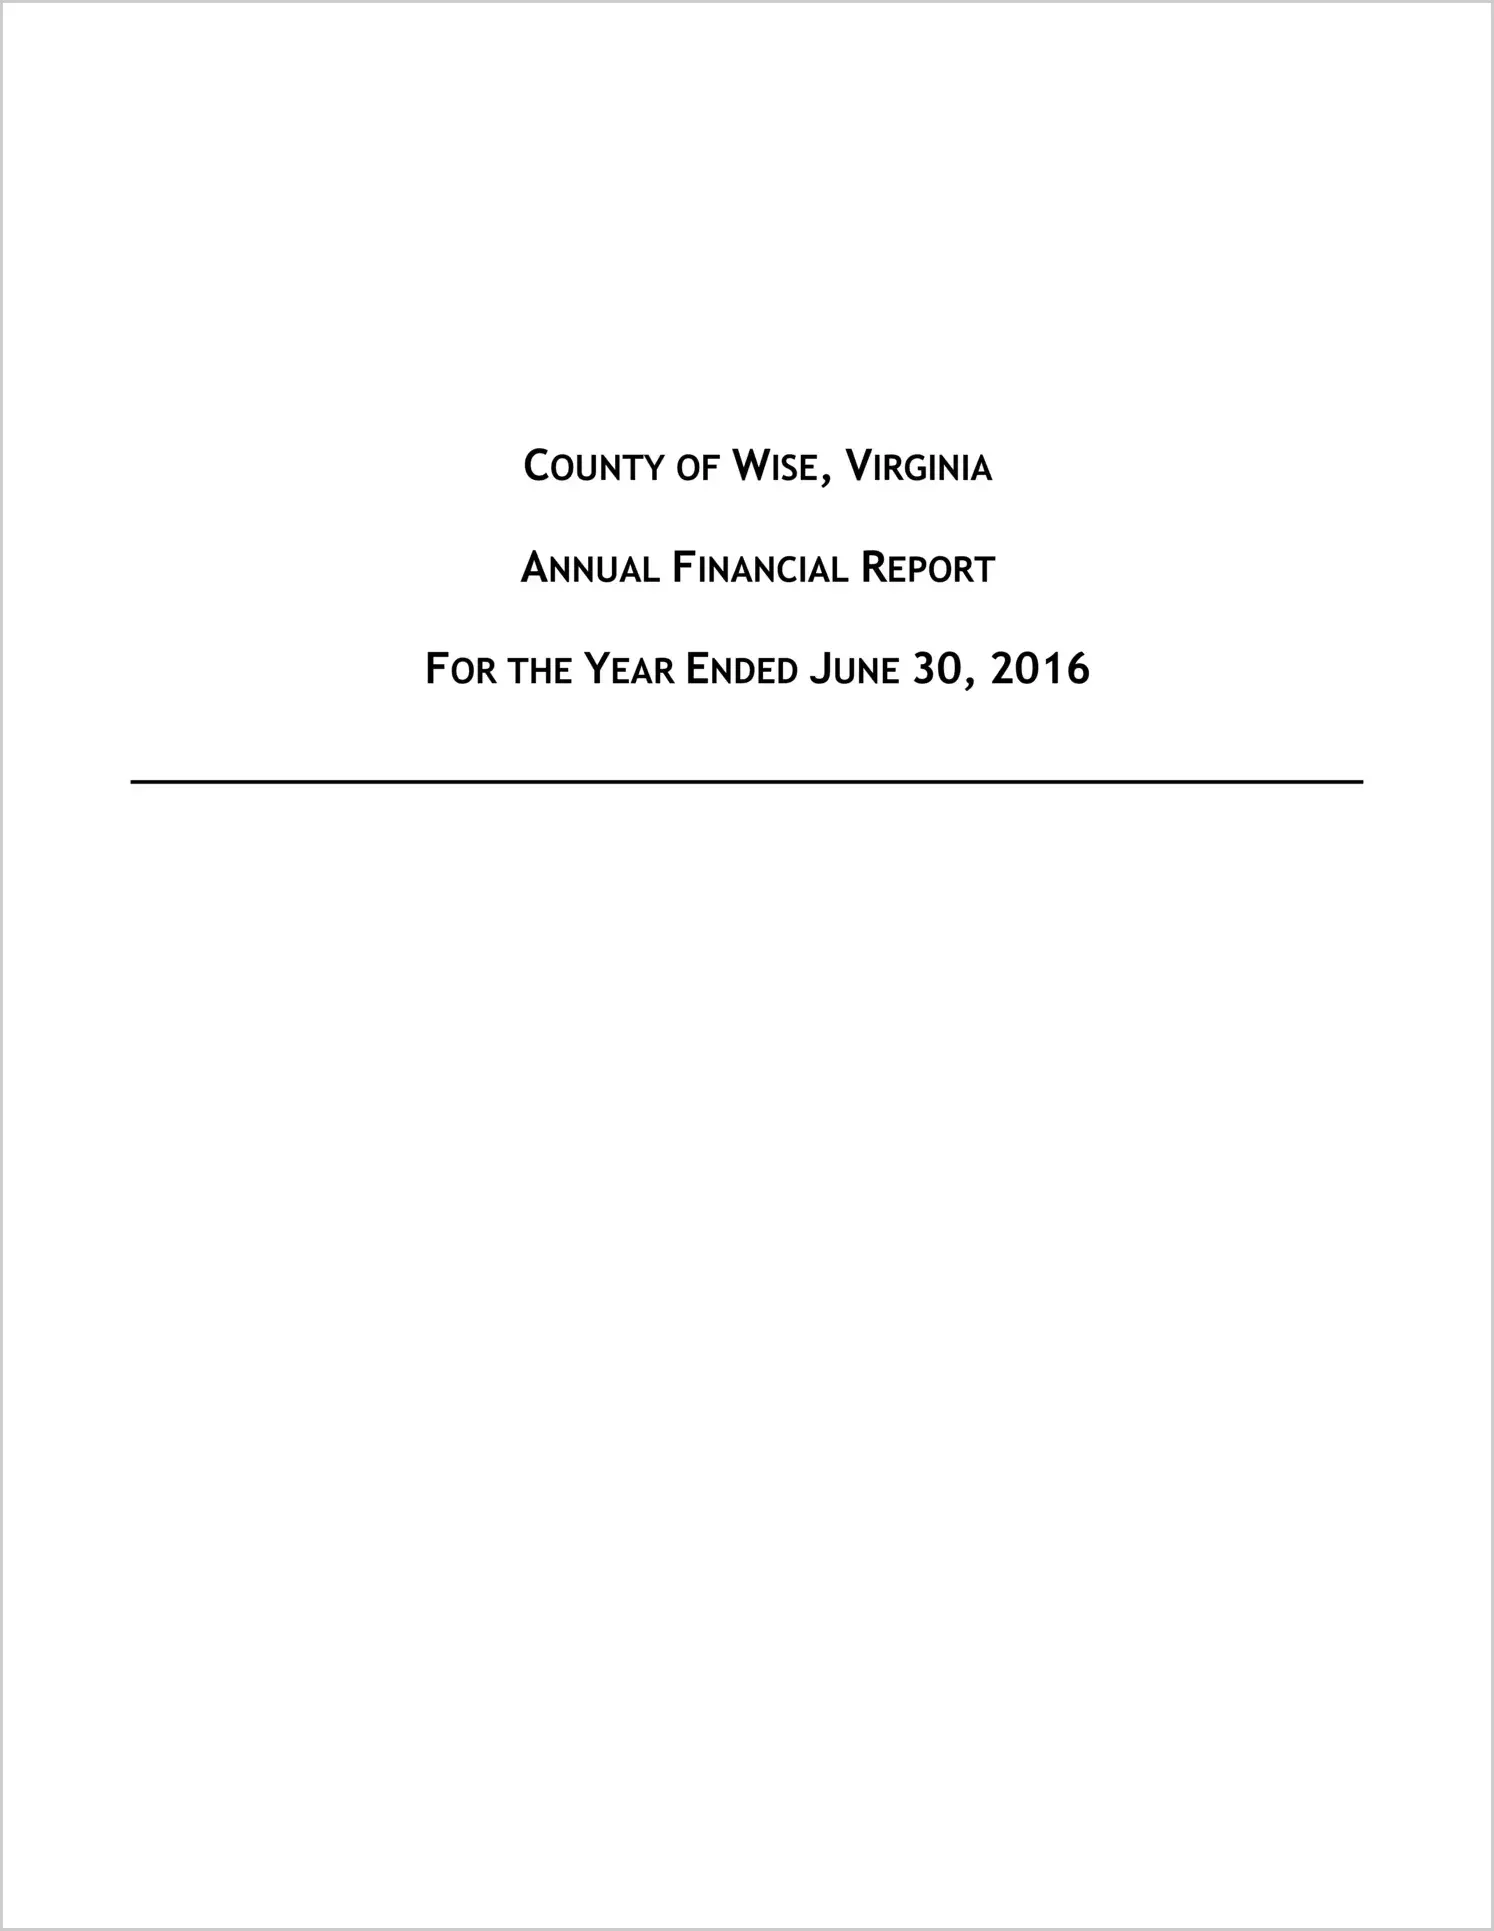 2016 Annual Financial Report for County of Wise